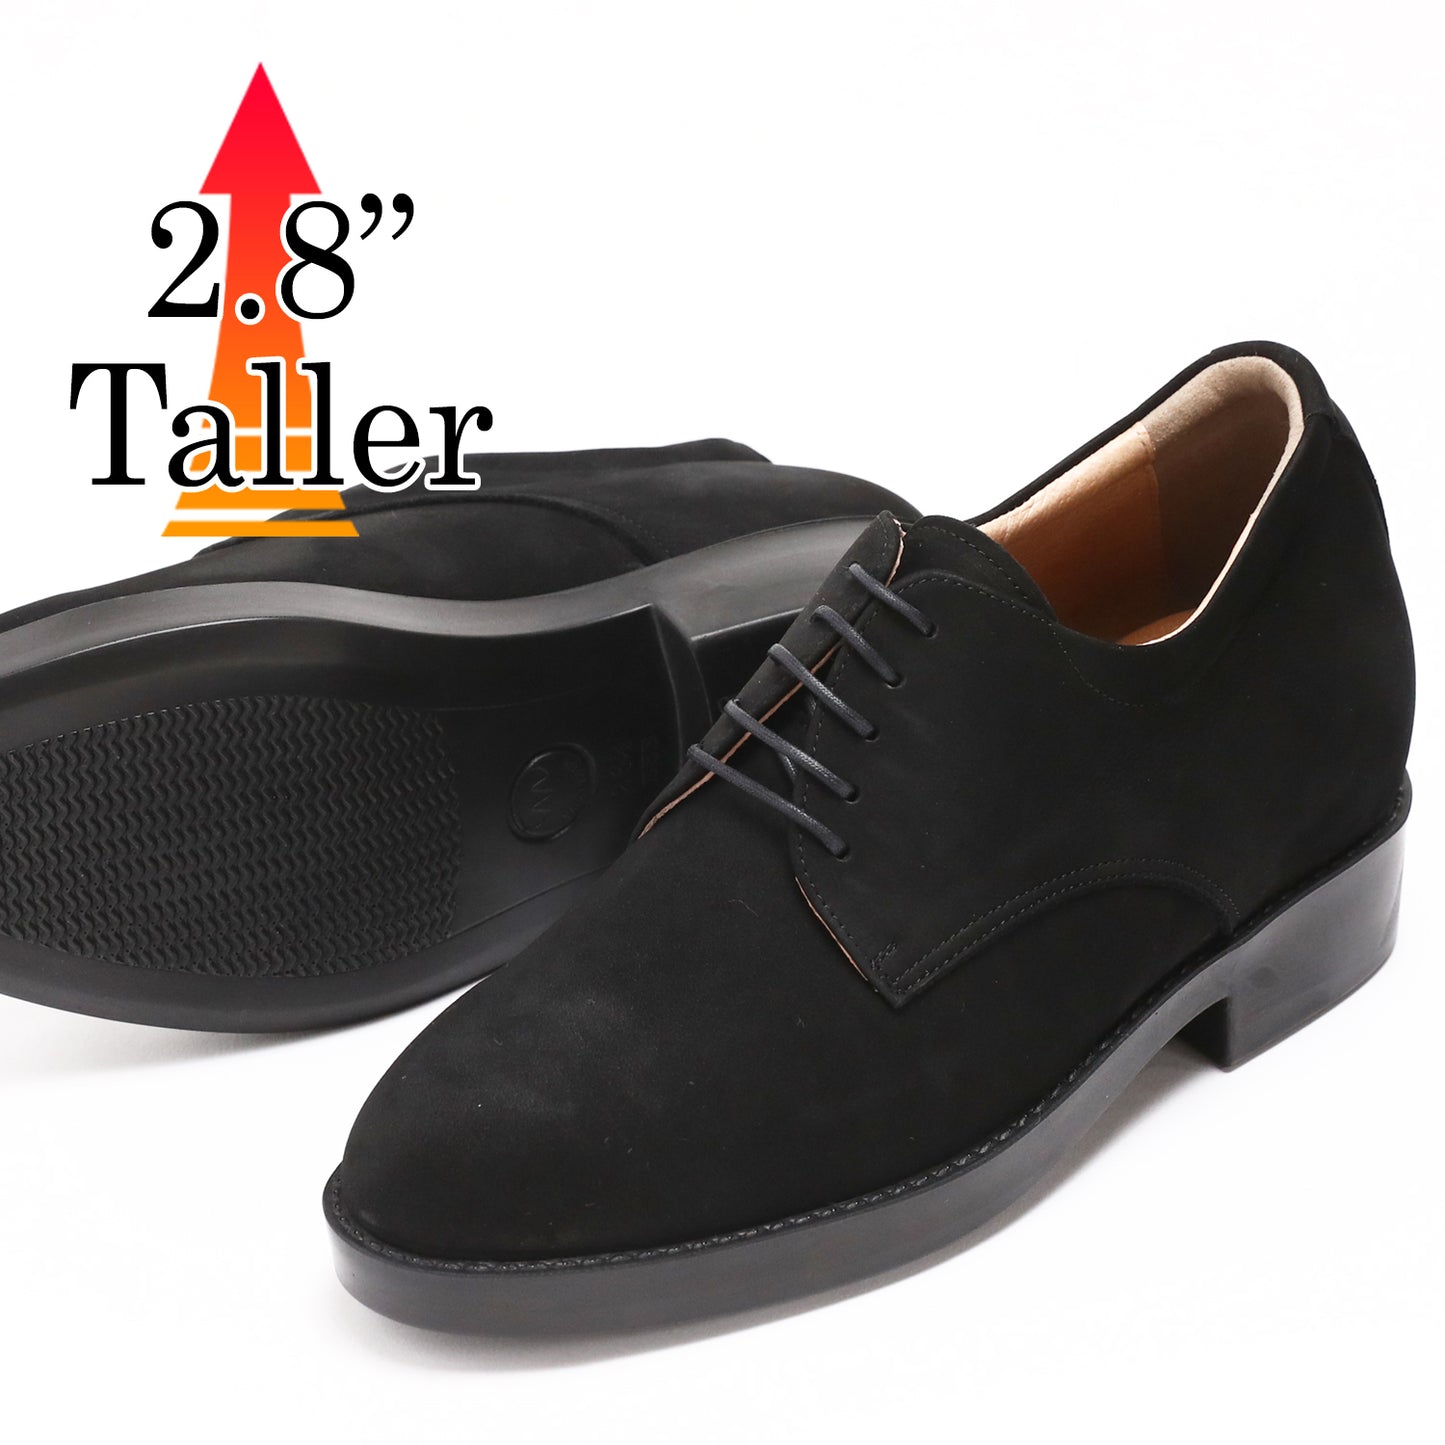 Men's Elevator Shoes Height Increasing 2.76" Taller Oxford Plain Toe Lace Up Casual Shoes Nubuck Leather No. 237